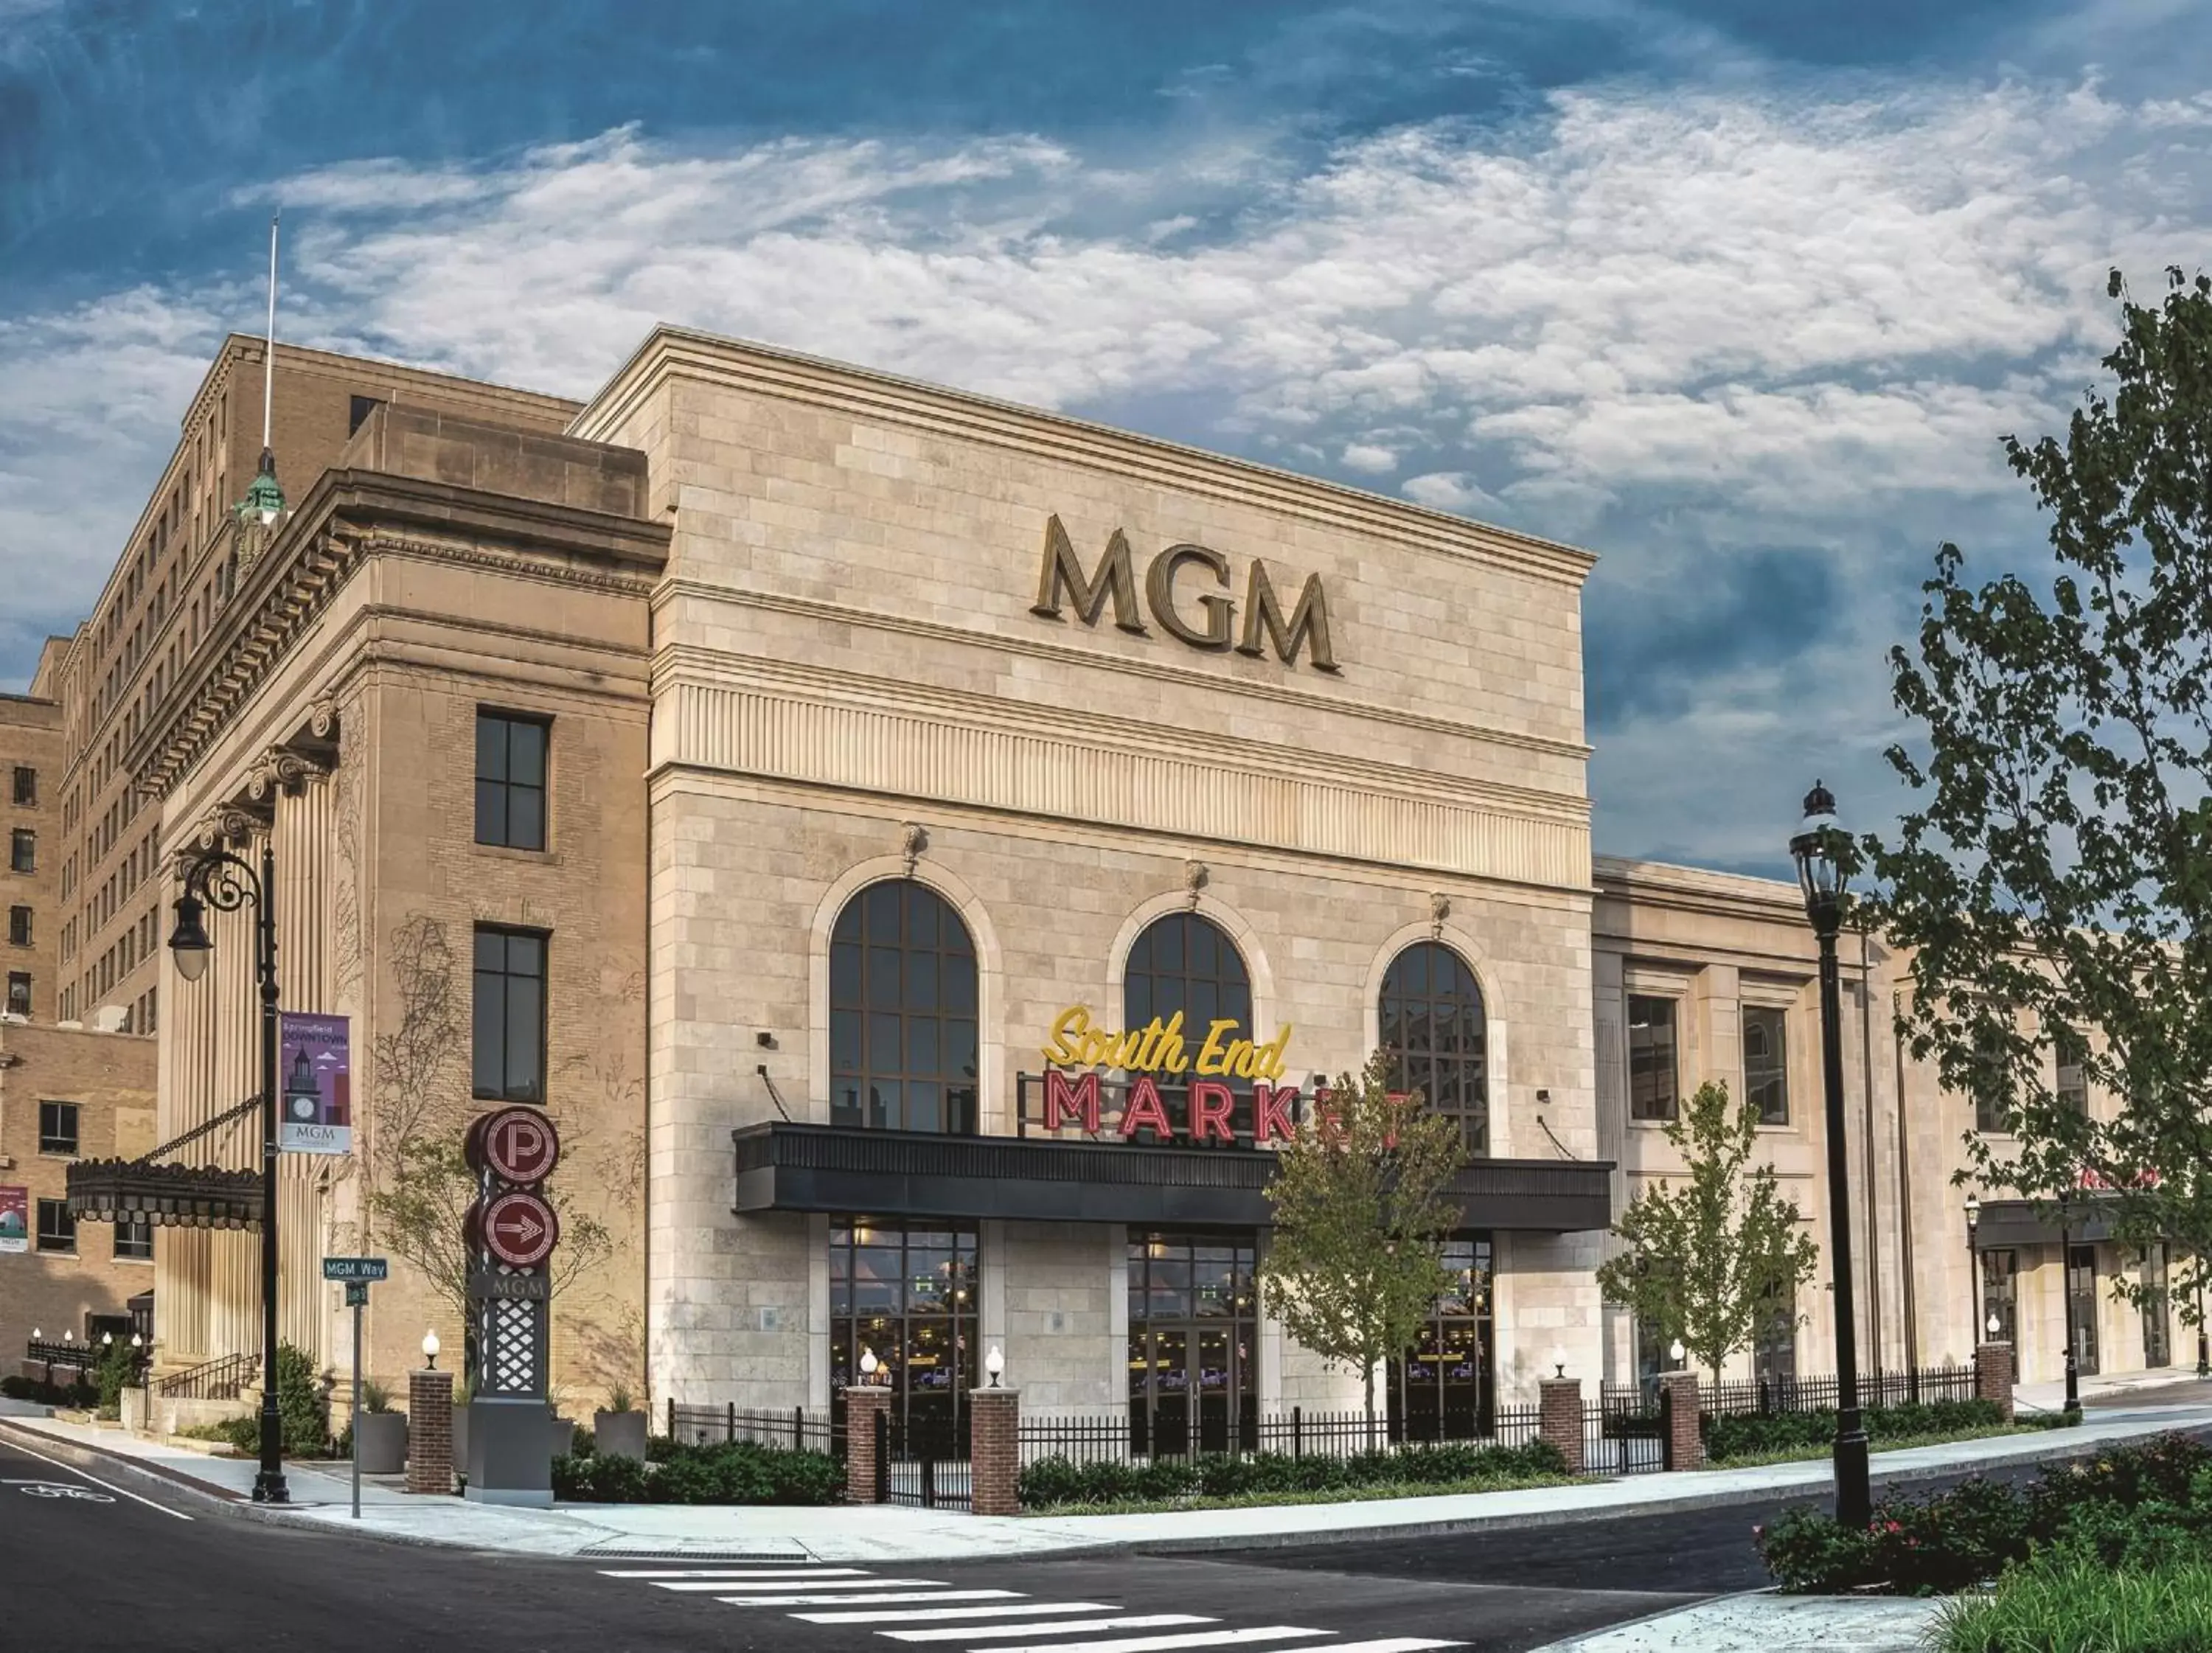 Property building in MGM Springfield